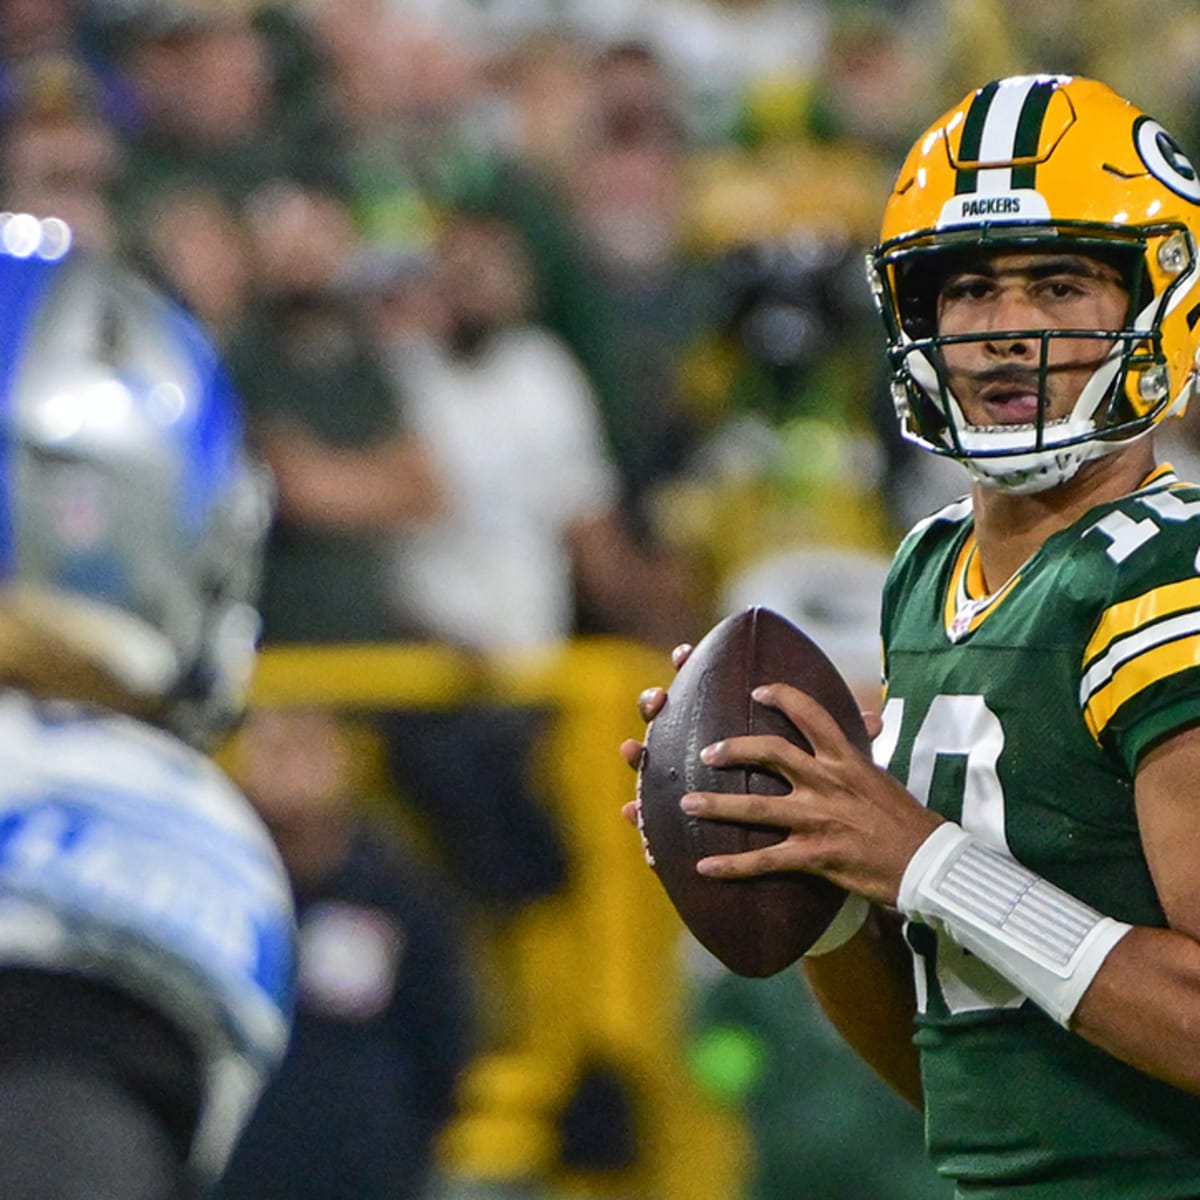 Are the Green Bay Packers the team to beat in the NFC?